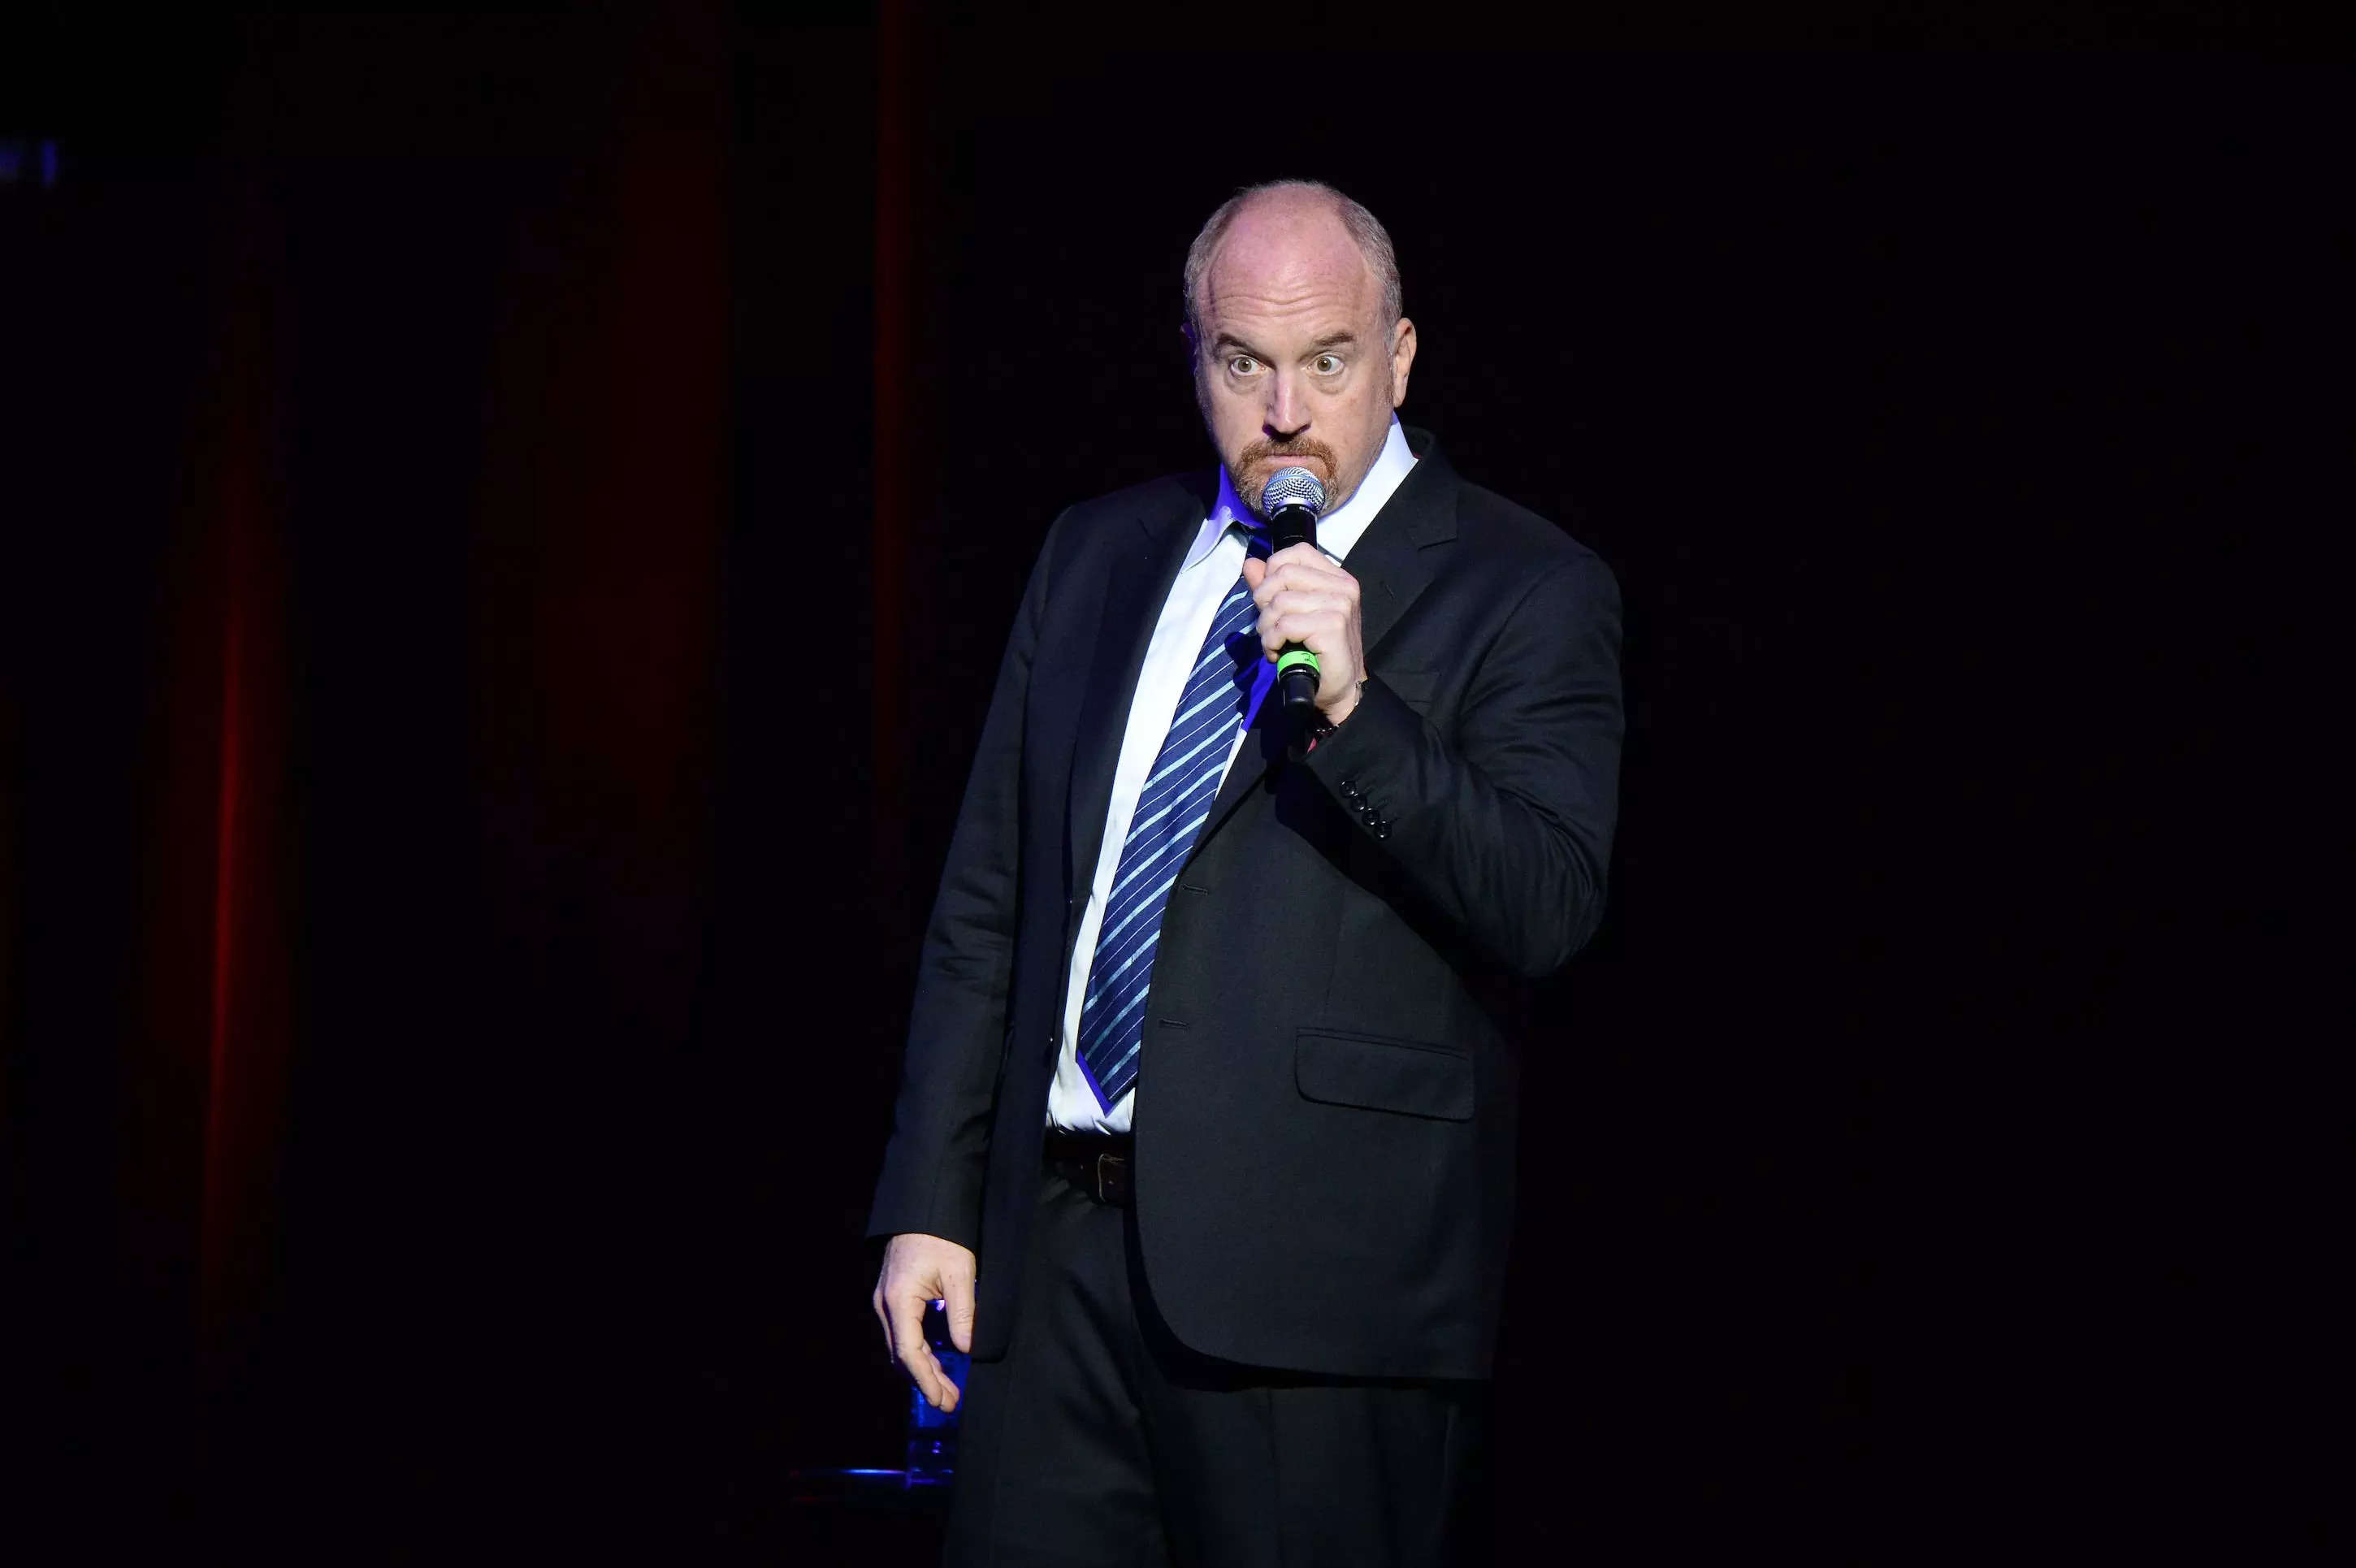 One of Louis C.K.'s accusers speaks out after his Grammy win